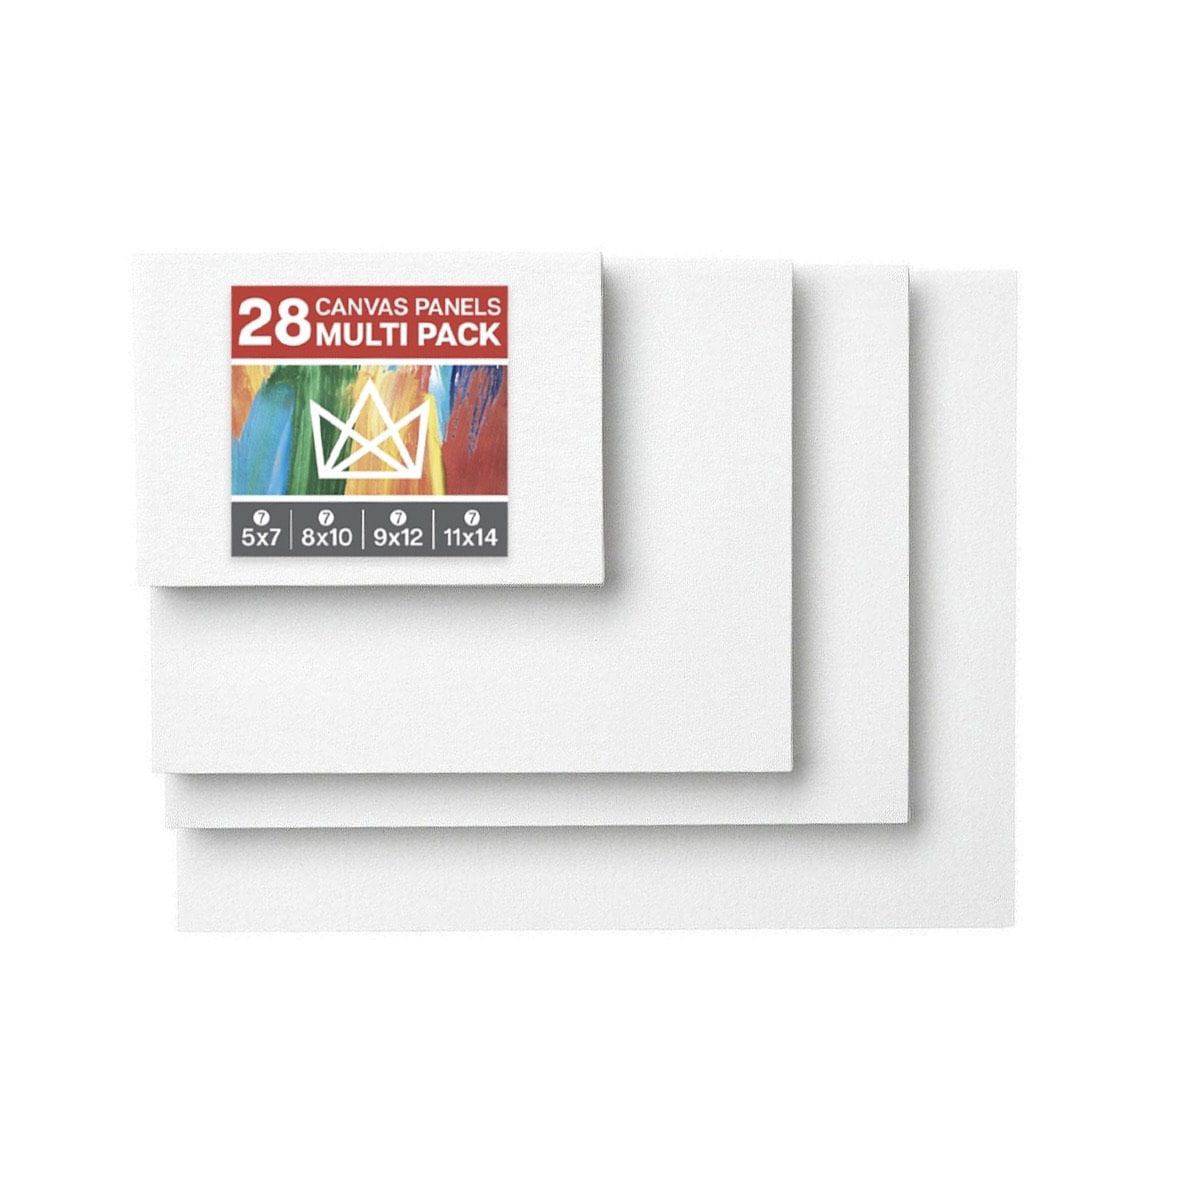 GOTIDEAL Canvas Panels Multi Pack, 5x7 inch, 8x10 inch, 9x12 inch, 11x14 inch Set of 28,Professional Primed White Blank- 100% Cotton Artist Canvas